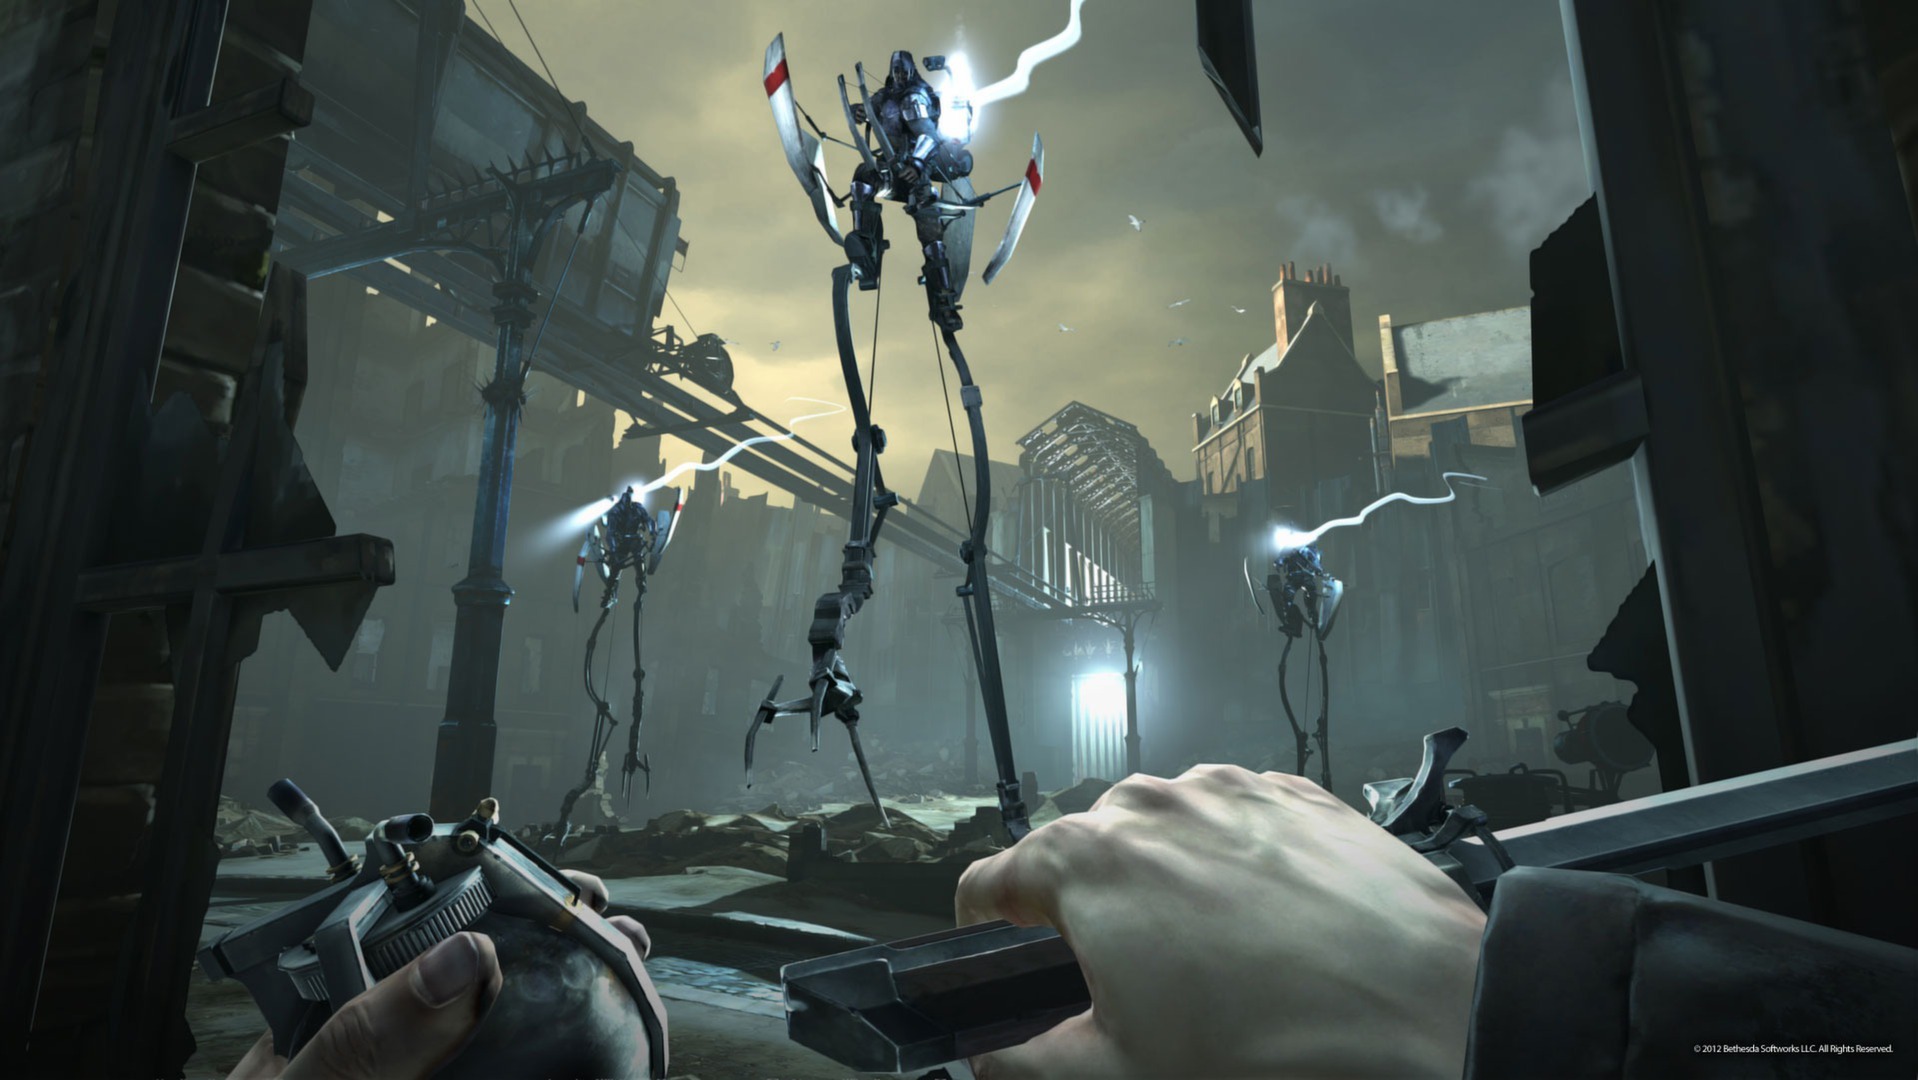 Dishonored no Steam